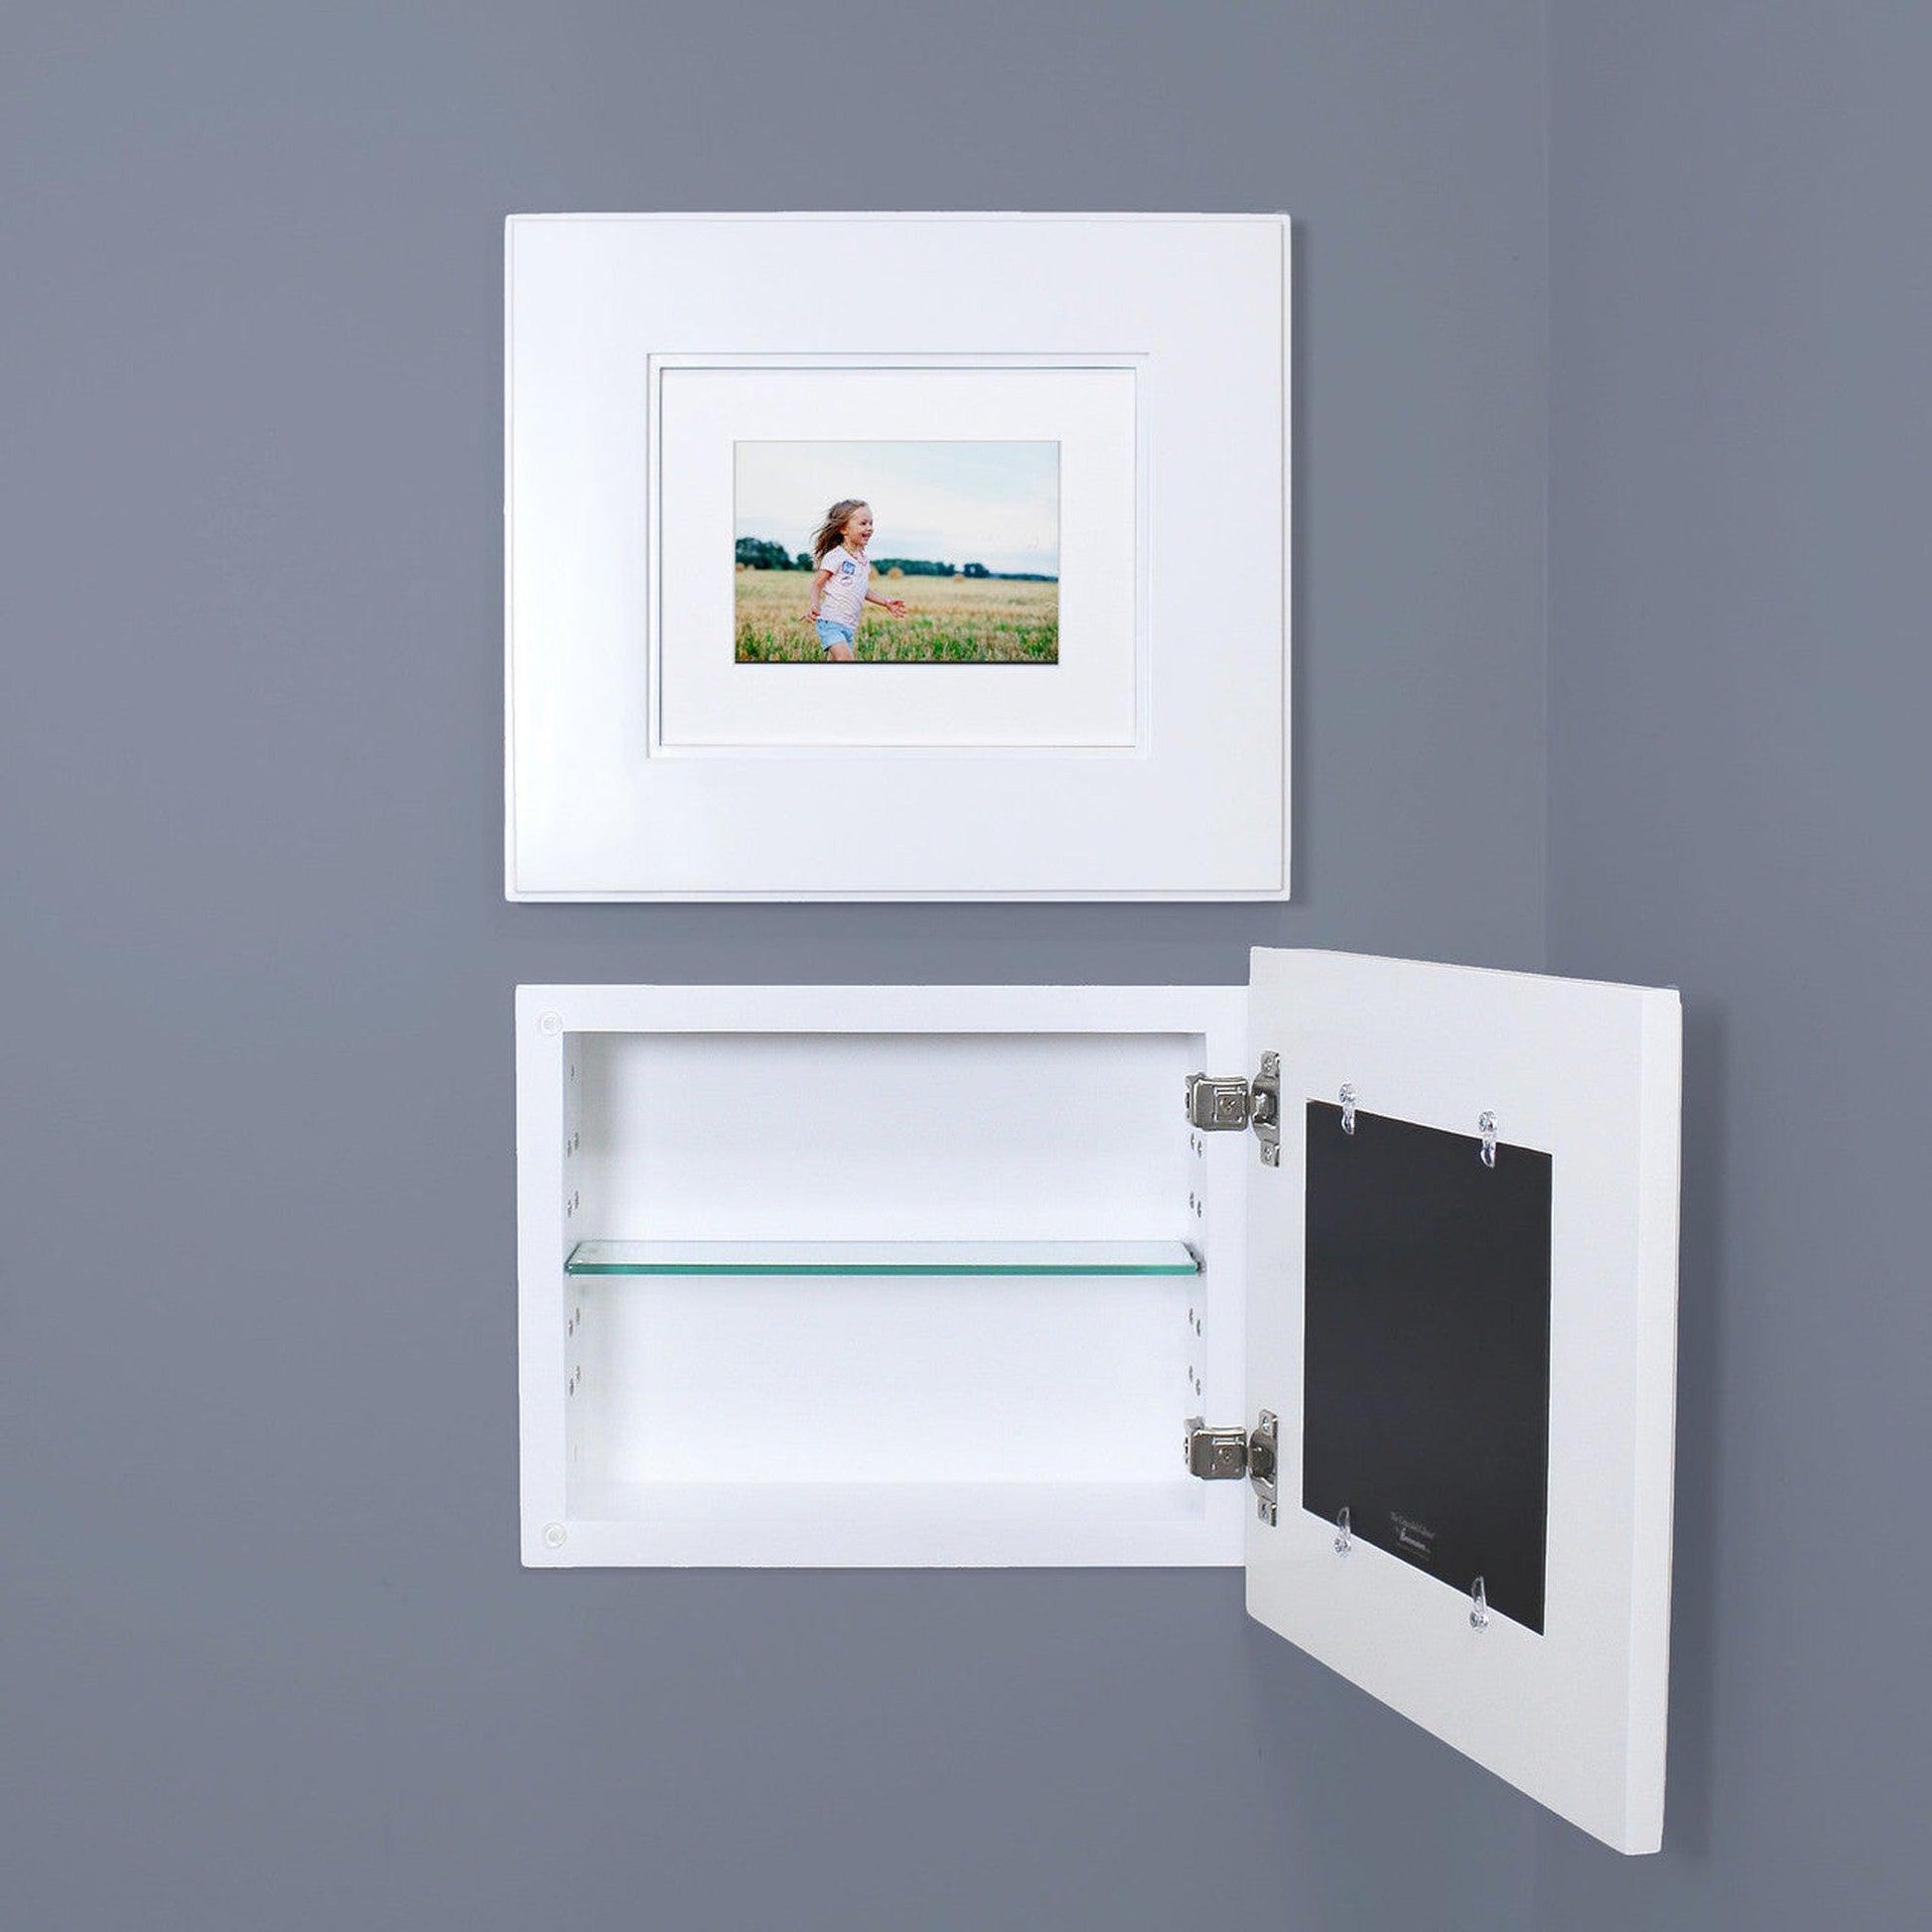 Fox Hollow Furnishings 14" x 11" White Compact Landscape Shaker Standard Deph Recessed Picture Frame Medicine Cabinet With Mirror and White Matting